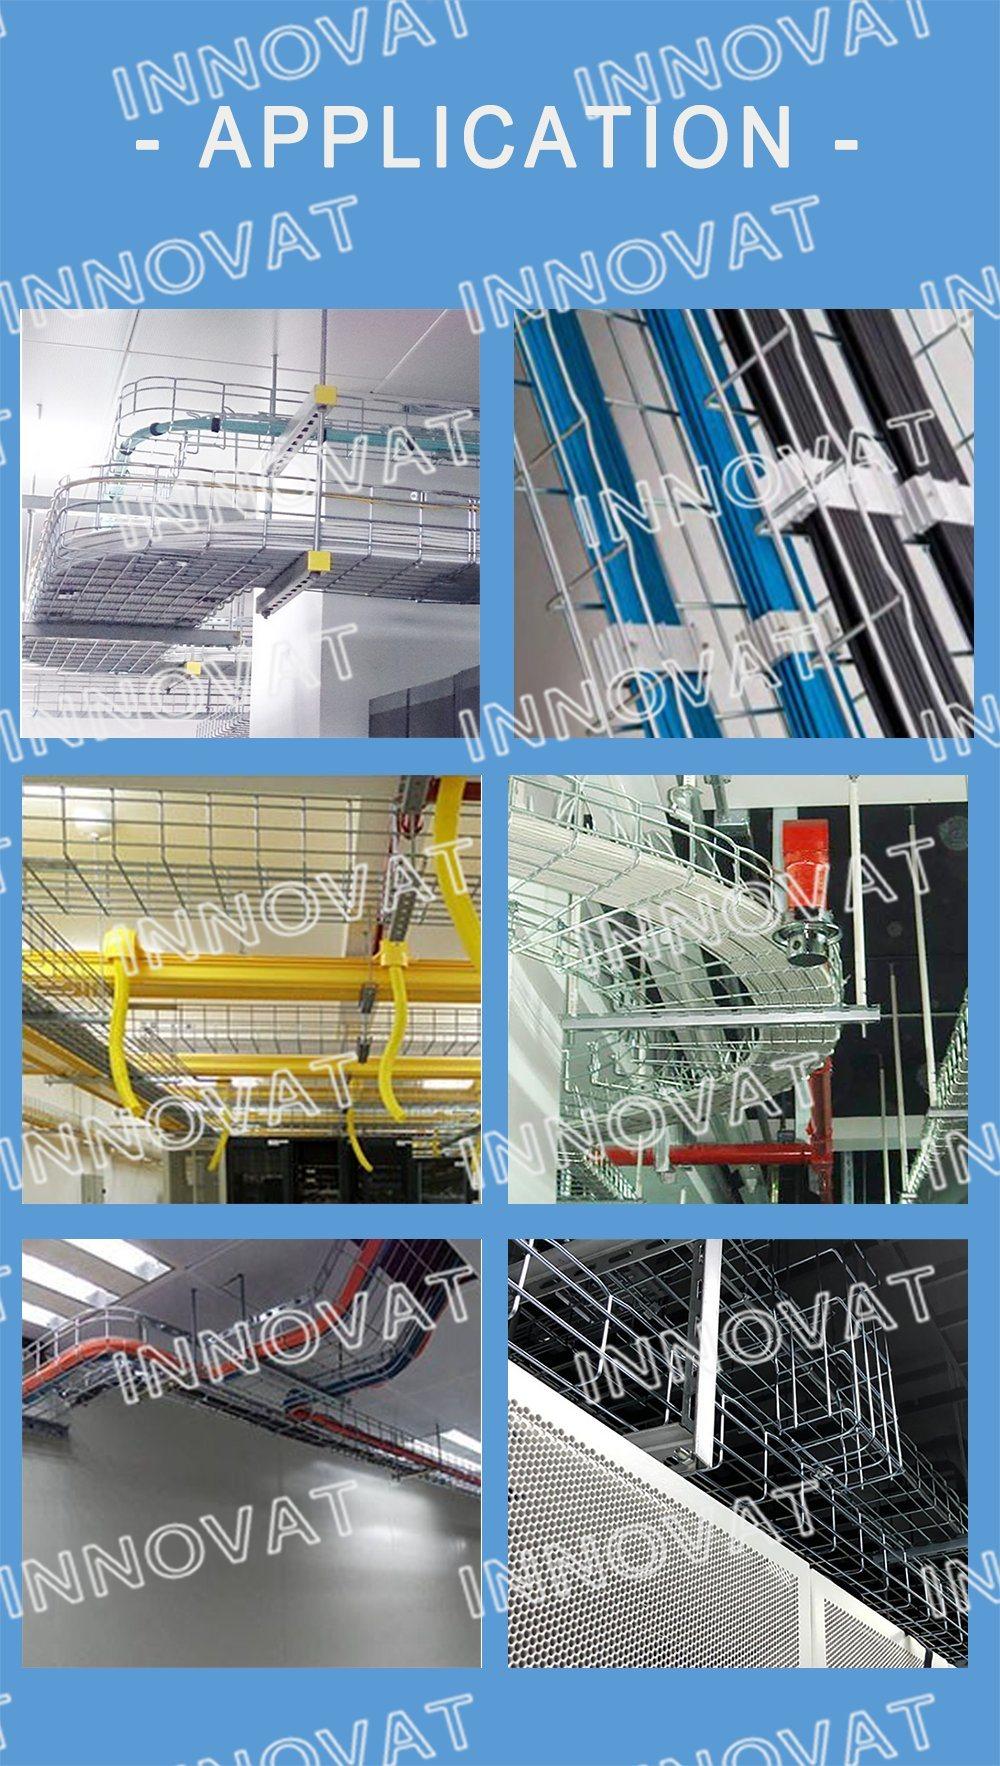 Cable Tray Steel Wire Mesh Cable Tray Perforated Ladder Type Cable Tray